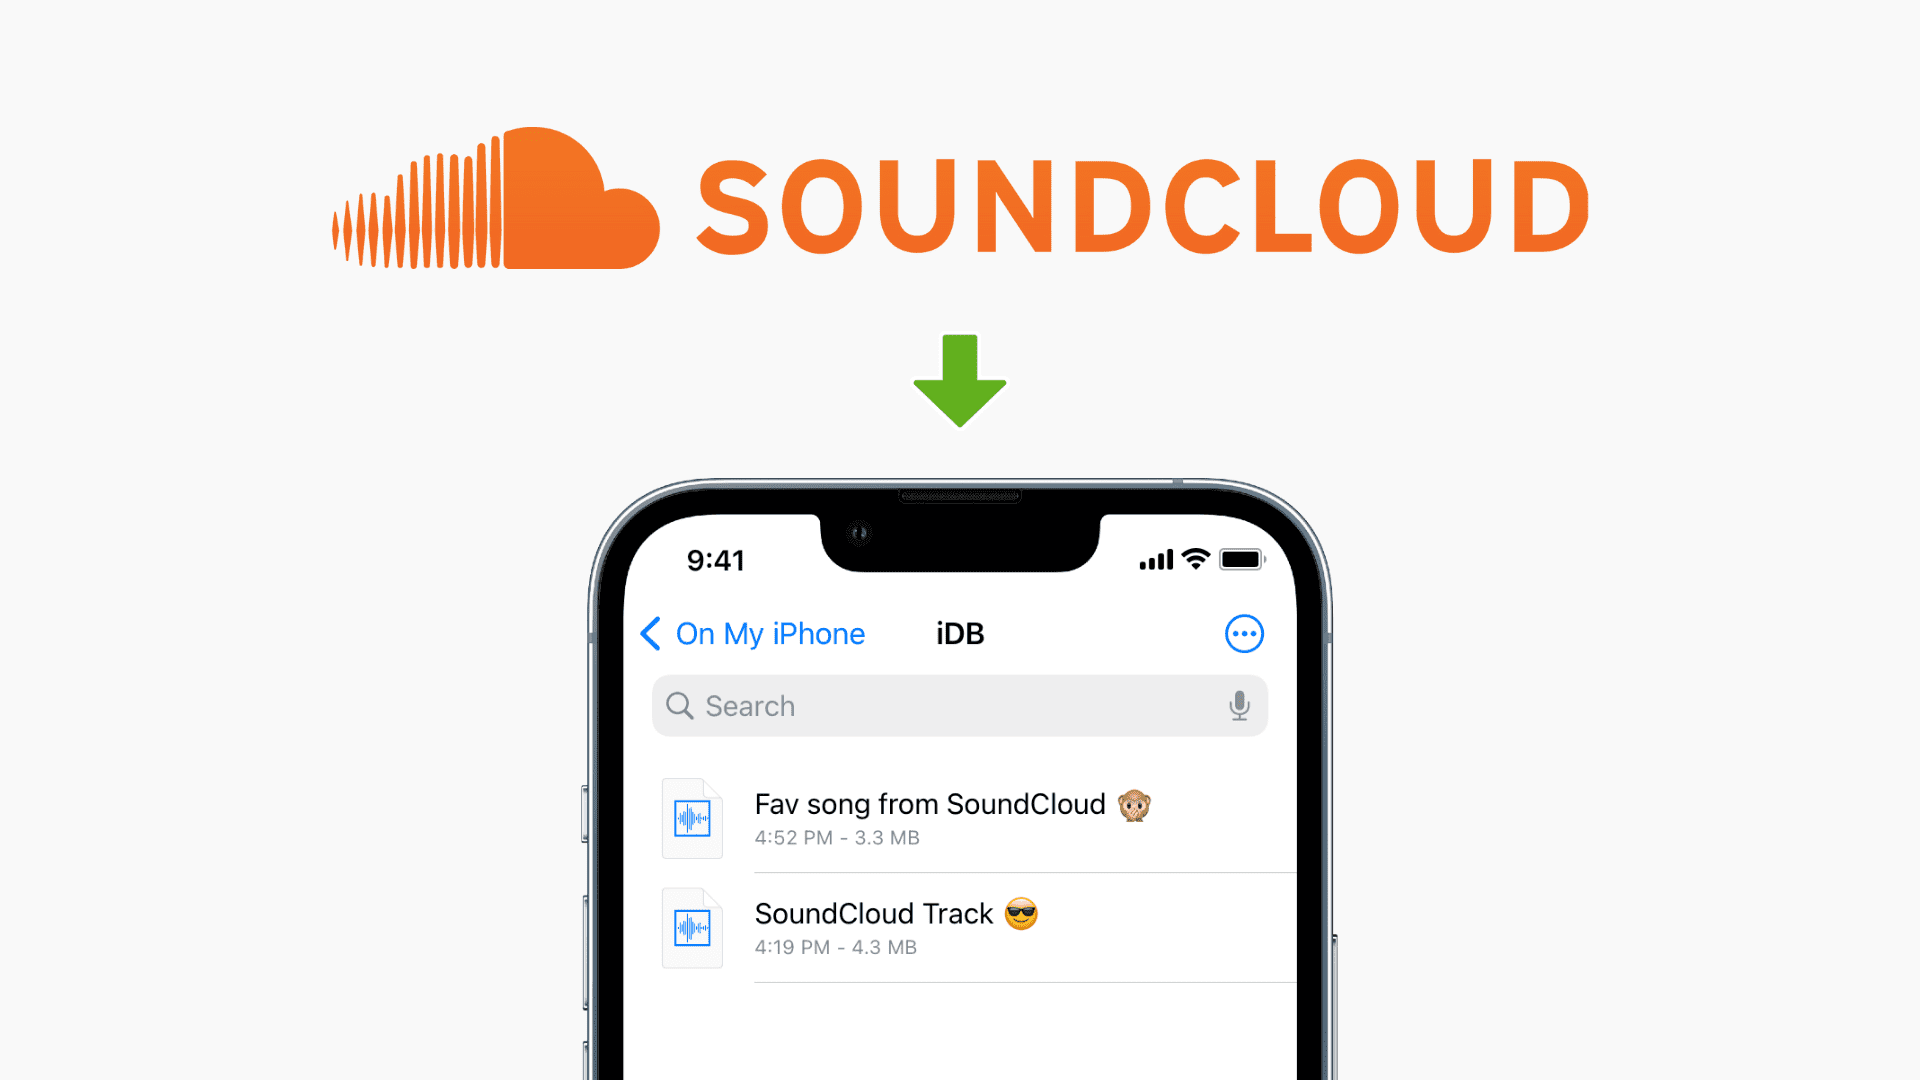 Download music from SoundCloud to iPhone